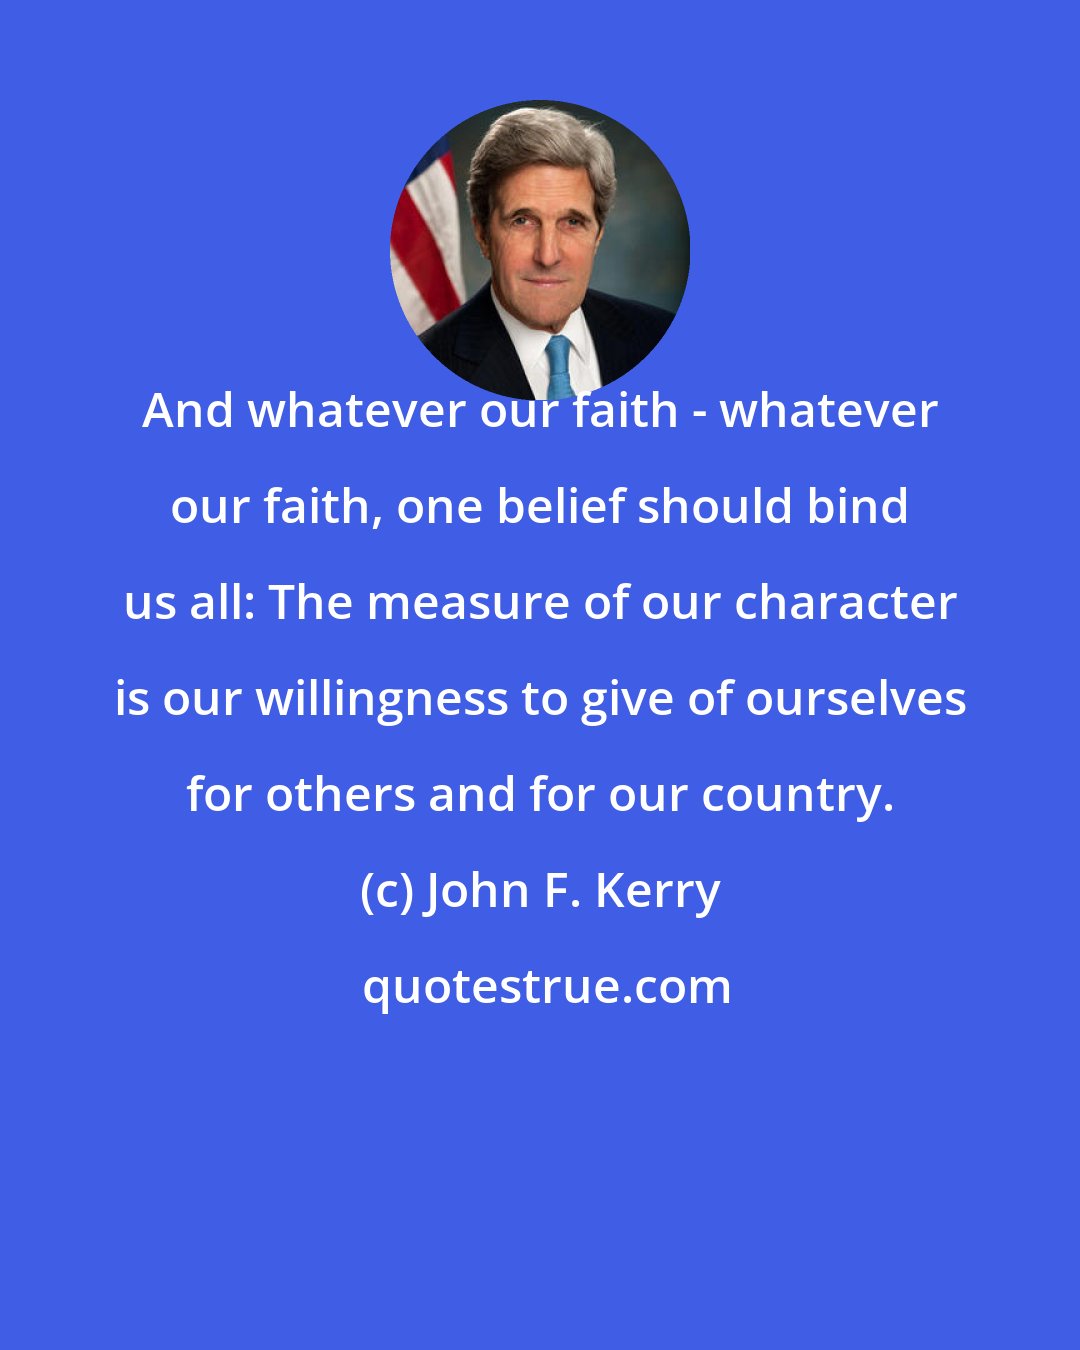 John F. Kerry: And whatever our faith - whatever our faith, one belief should bind us all: The measure of our character is our willingness to give of ourselves for others and for our country.